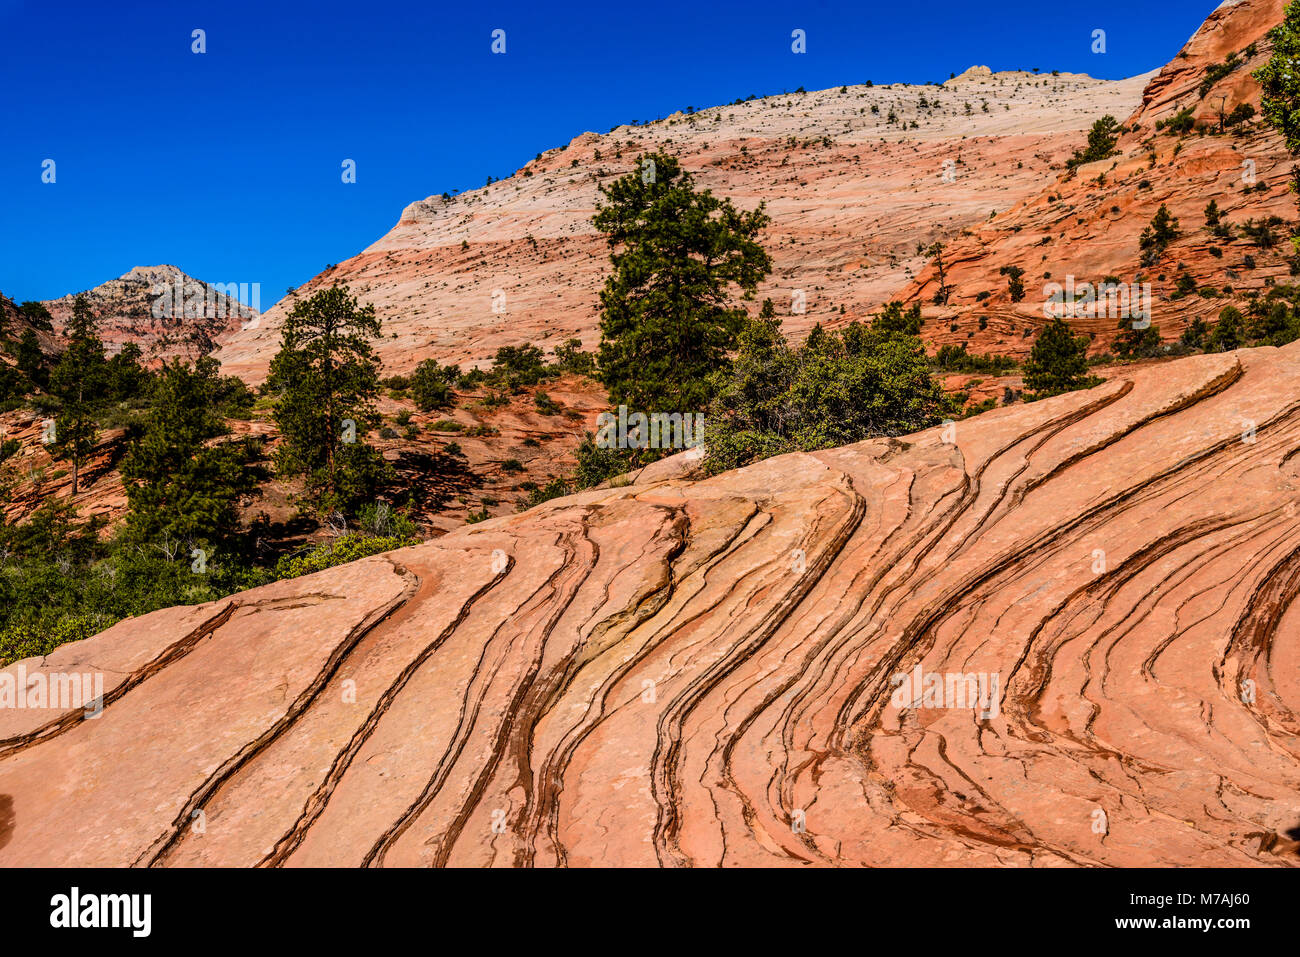 The USA, Utah, Washington county, Springdale, Zion National Park, part of town, scenery at the Zion - Mount Carmel Highway Stock Photo